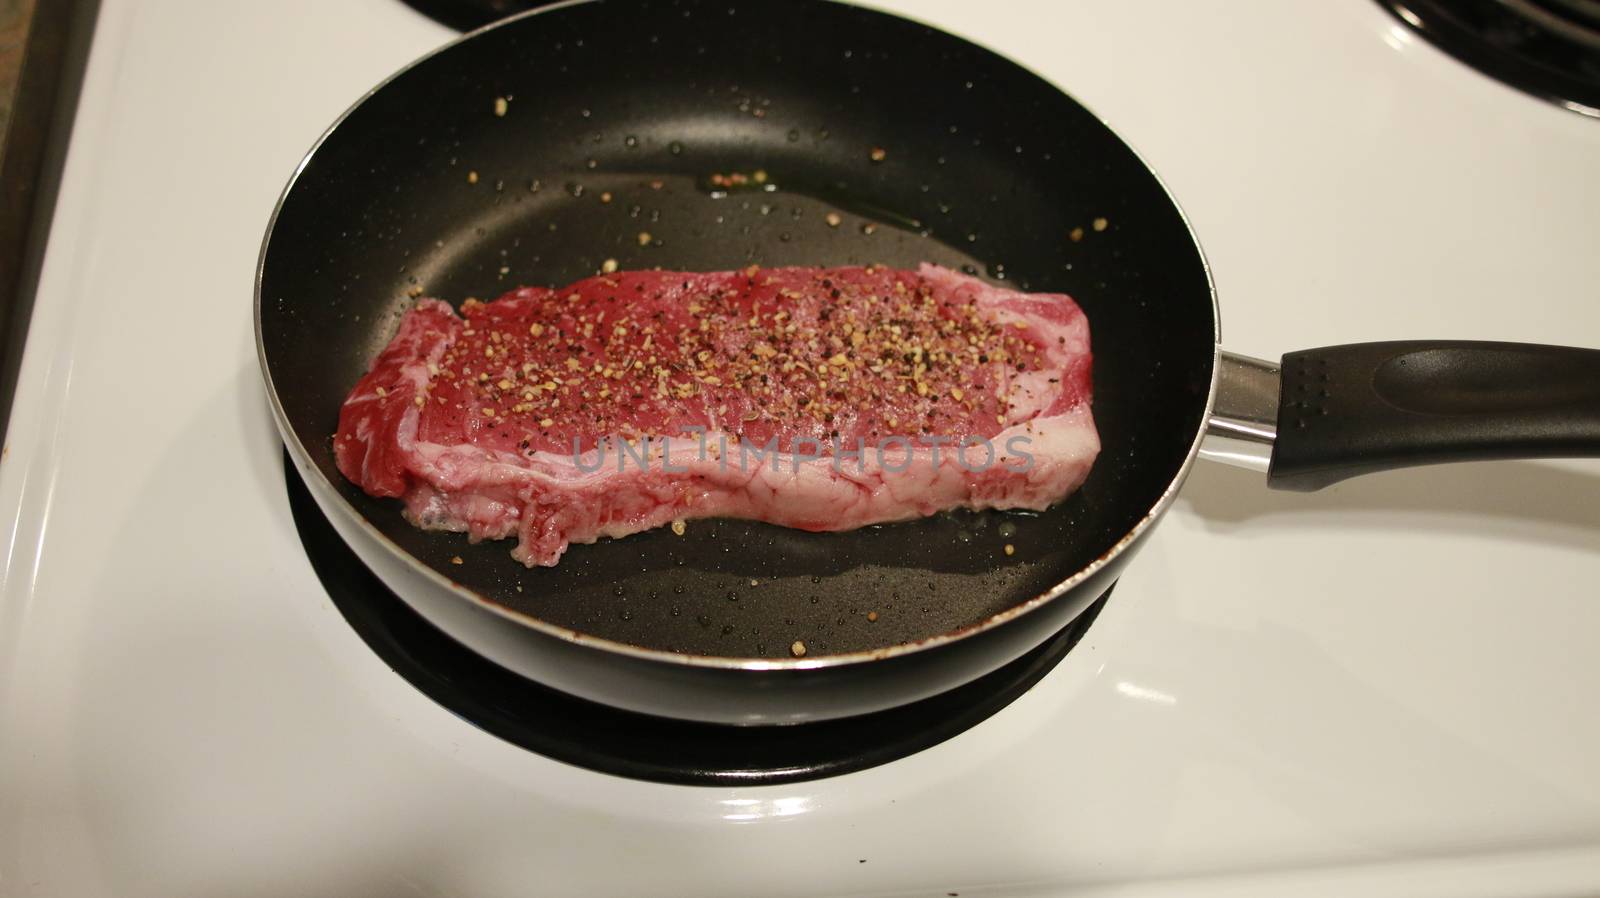 Raw meat Steak with ingredients and pan. Raw fresh meat Steak Striploin with ingredients and frying pan